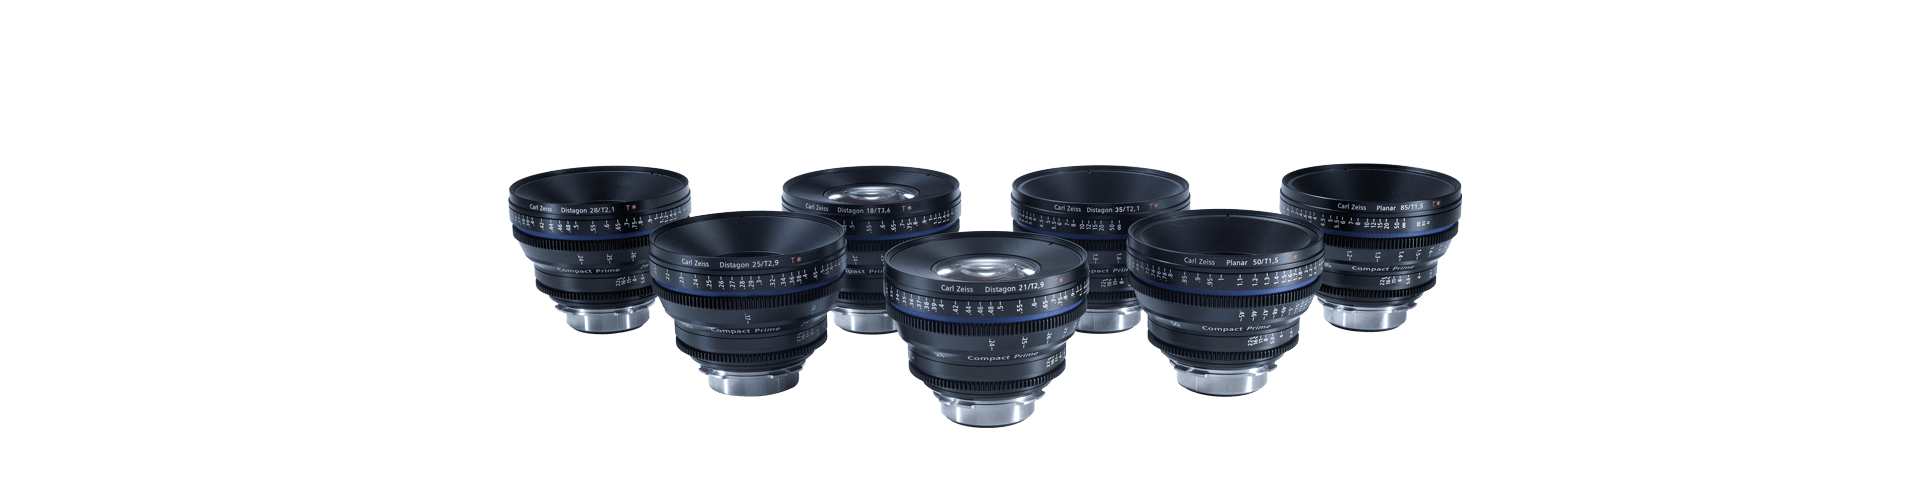 Zeiss CP.2 EF/PL 25mm T2.1